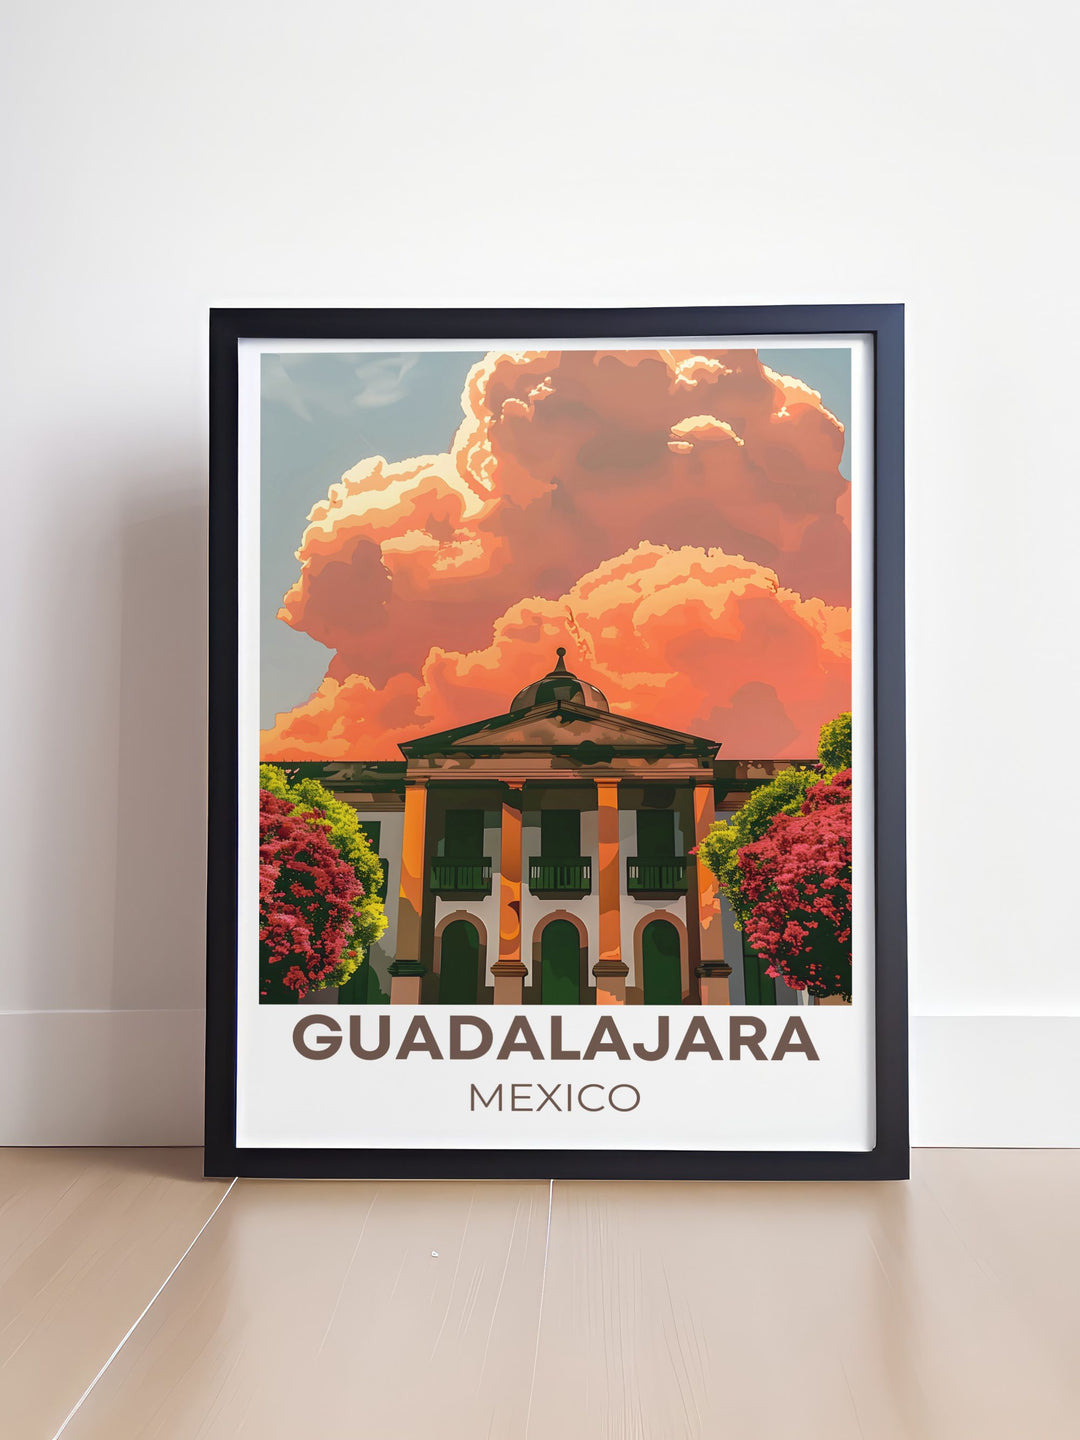 Featuring the historic Hospicio Cabañas, this art print highlights the architectural beauty and cultural significance of one of Mexicos most iconic landmarks, making it an ideal addition to any room.